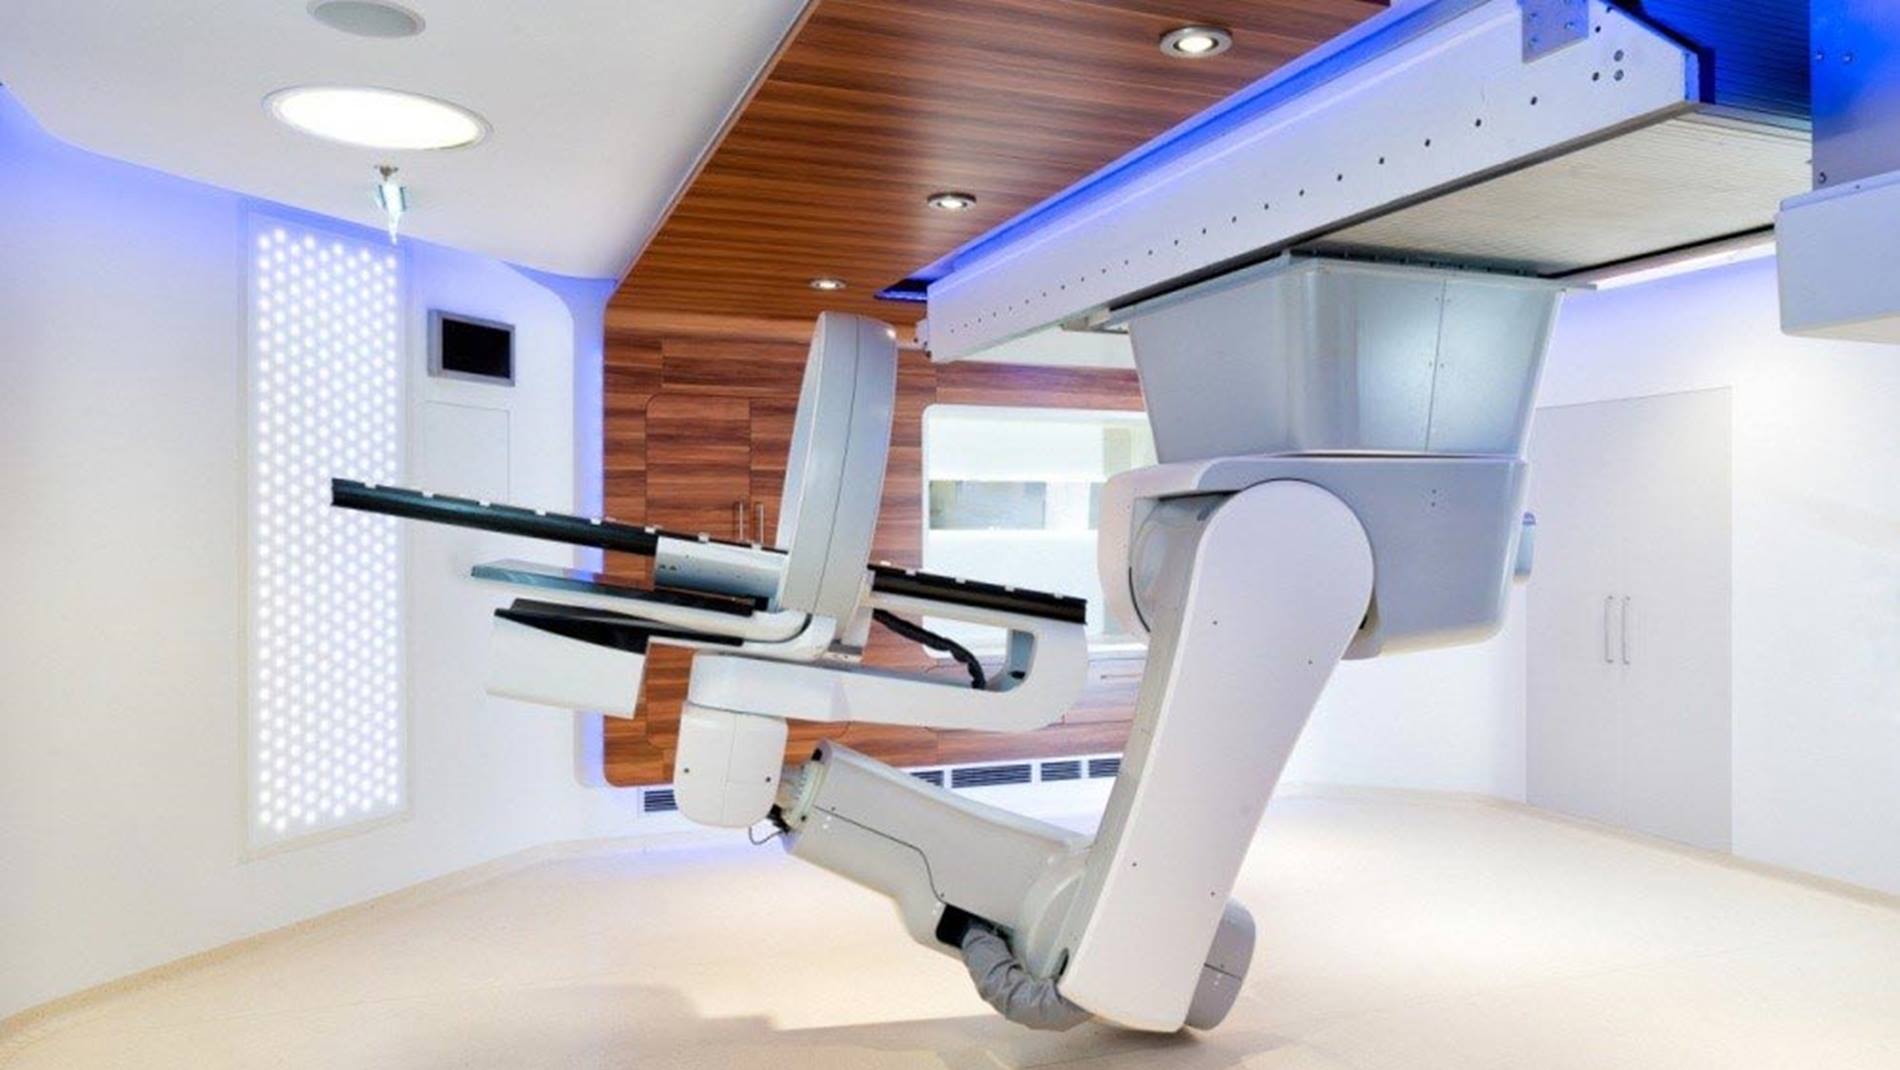 By being ceiling-mounted, the robot-based kinematic system by BEC can make optimal use of the treatment room